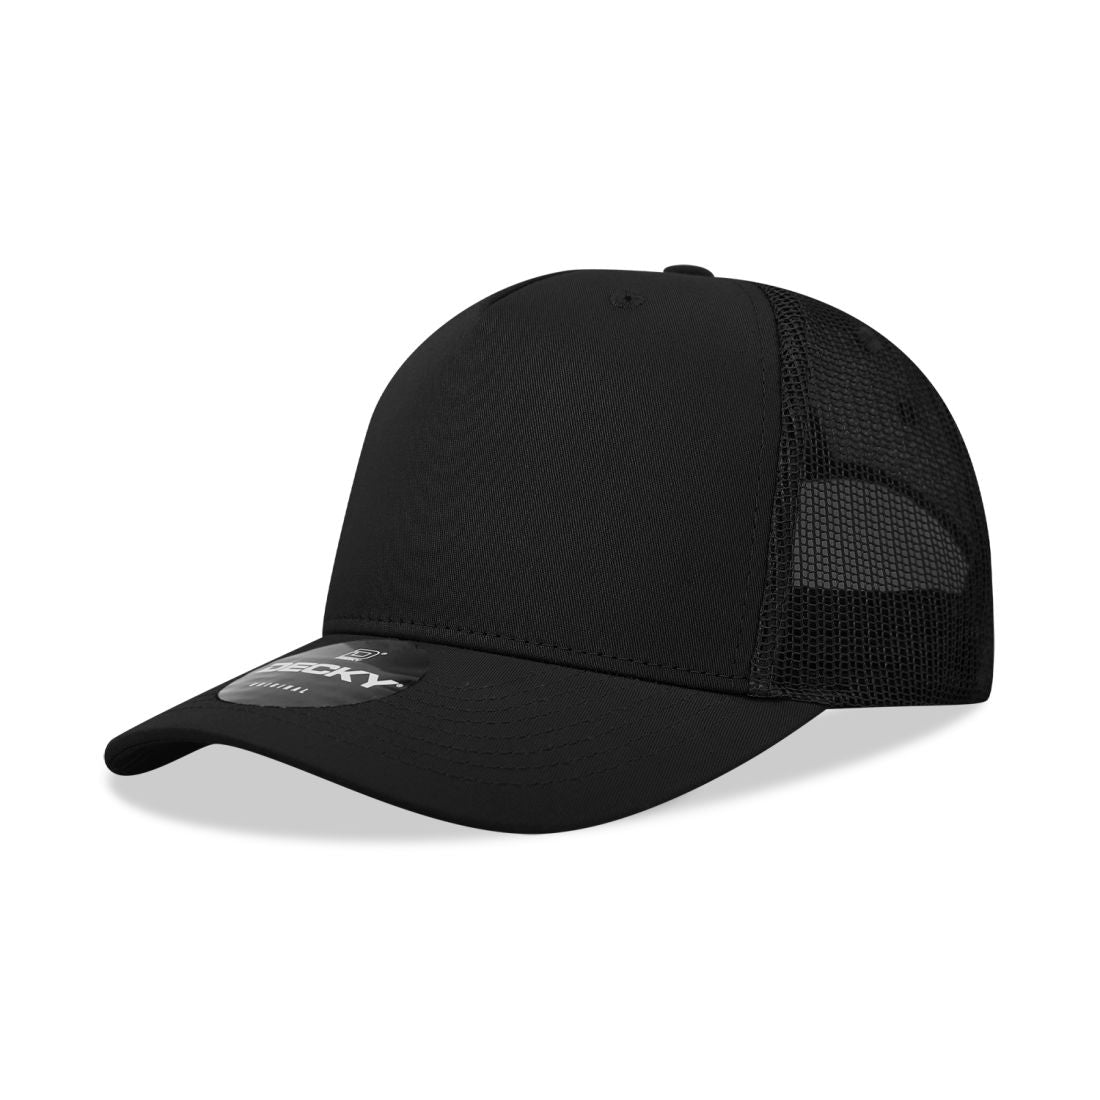 Decky 6030 Mid Profile Trucker Hats 5 Panel Caps Cotton Structured